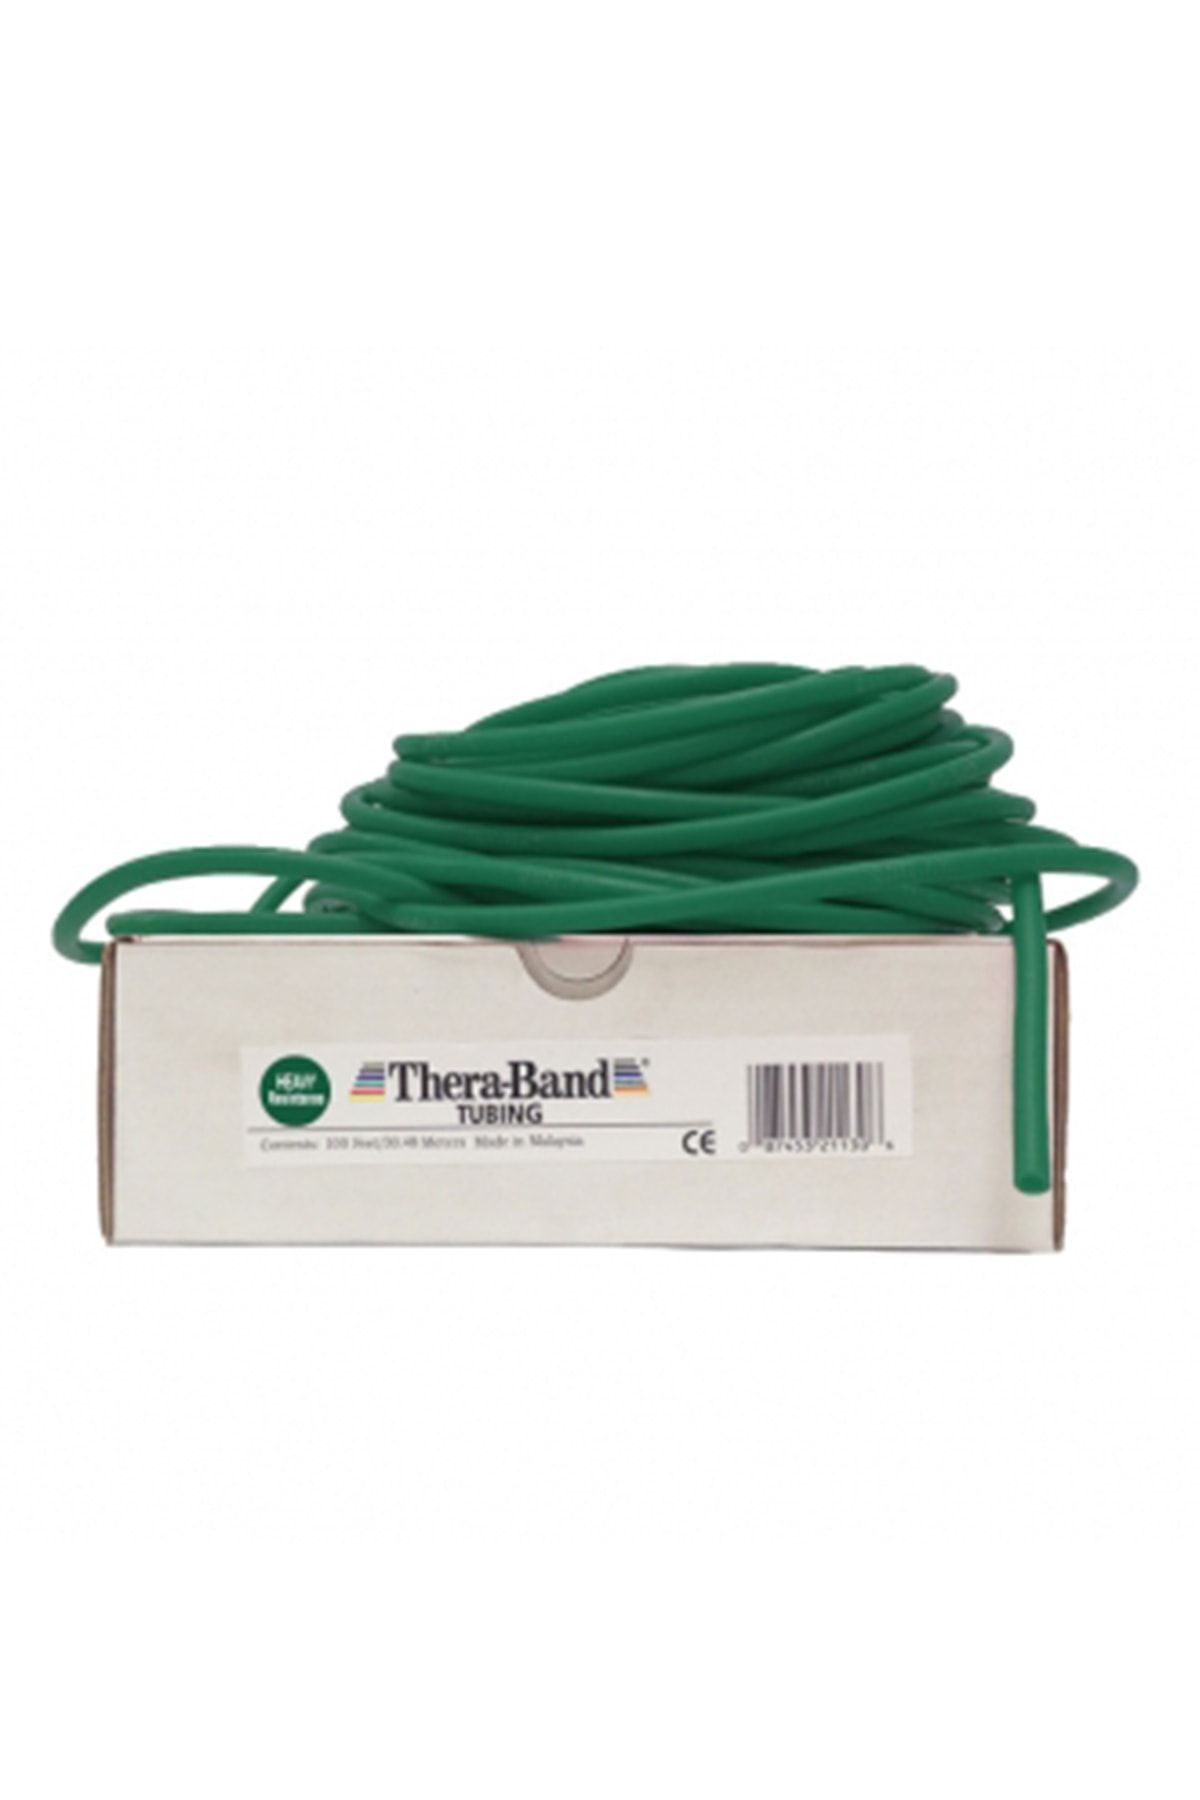 Theraband Green Tubıng 100ft Ce